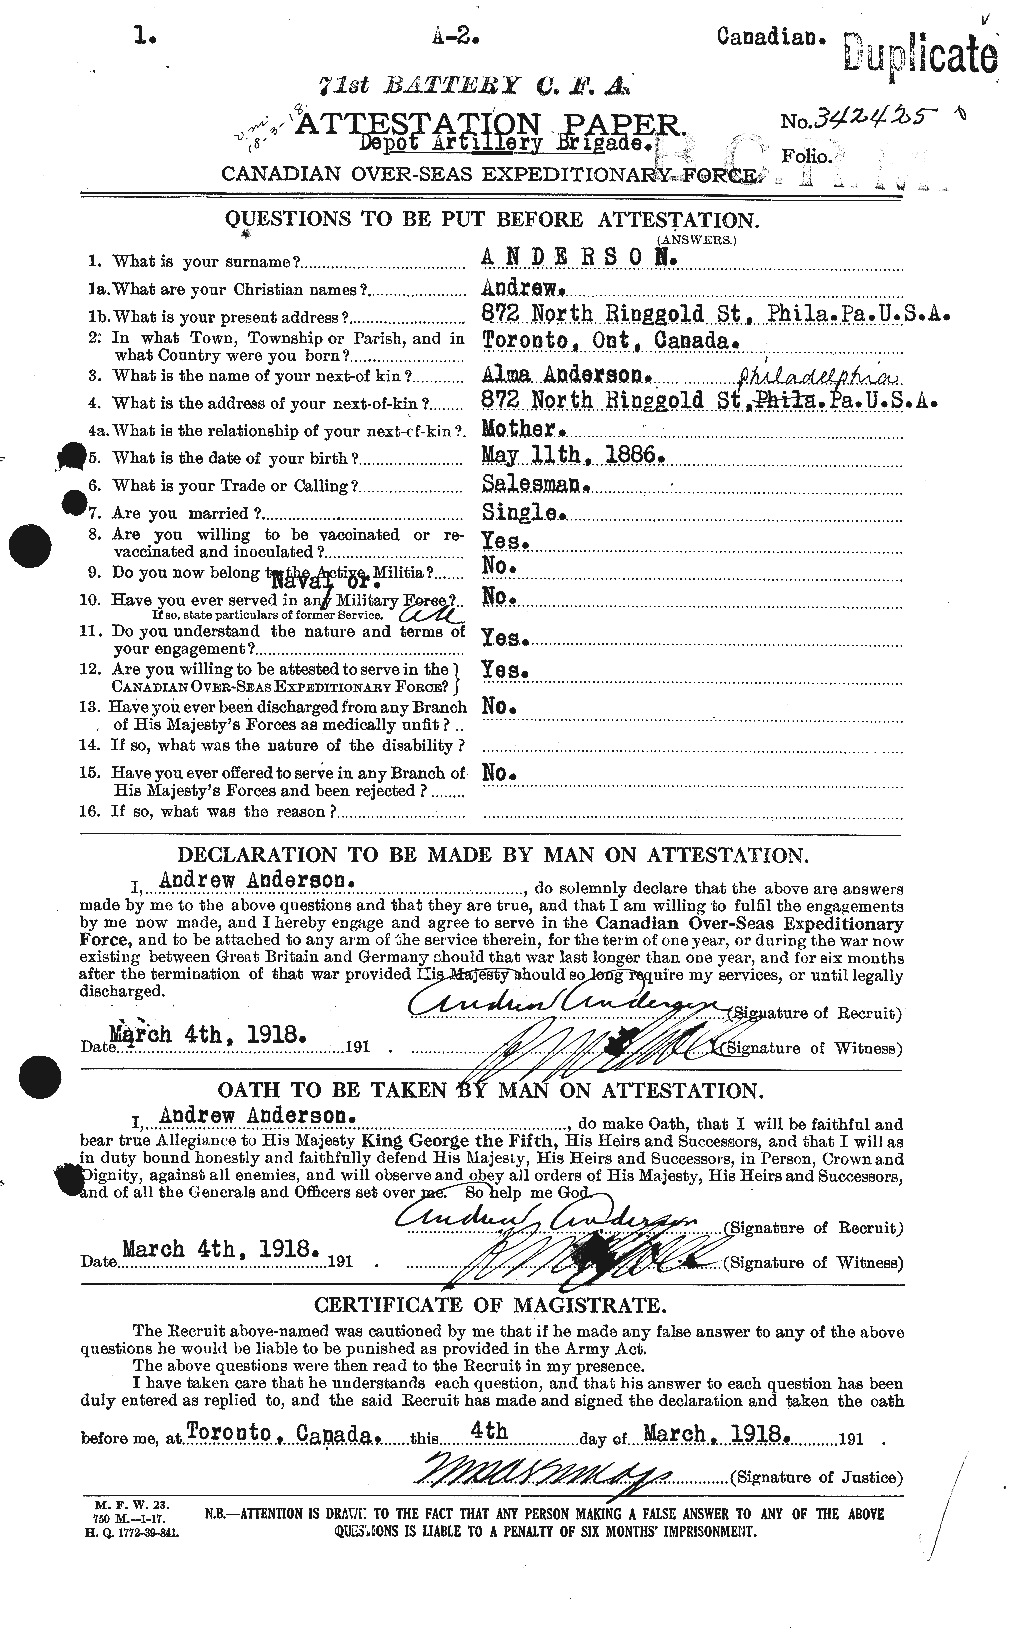 Personnel Records of the First World War - CEF 209430a